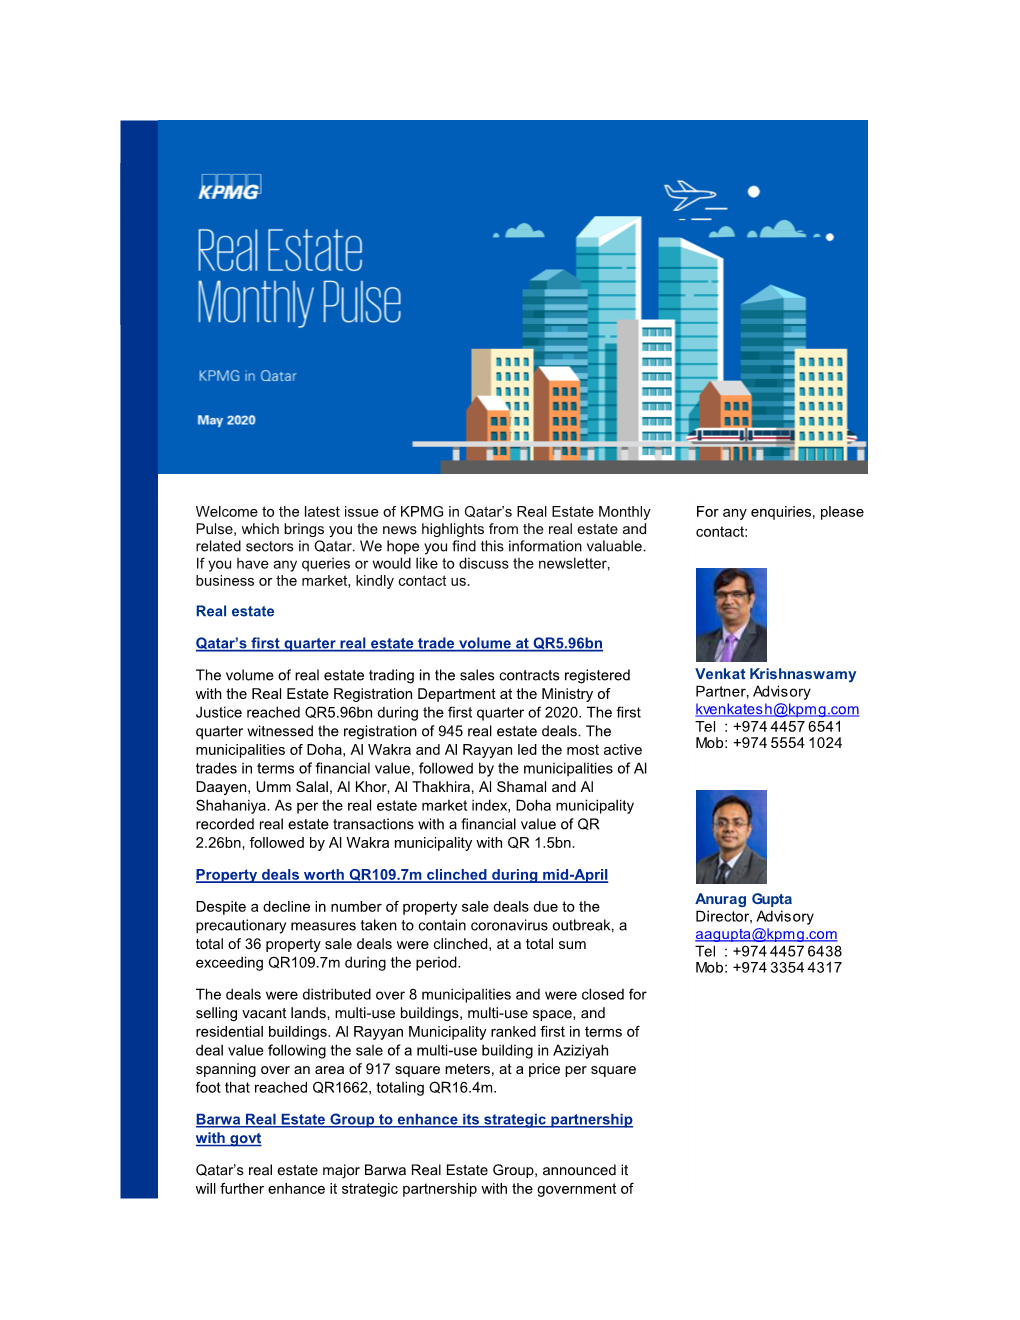 The Latest Issue of KPMG in Qatar's Real Estate Monthly